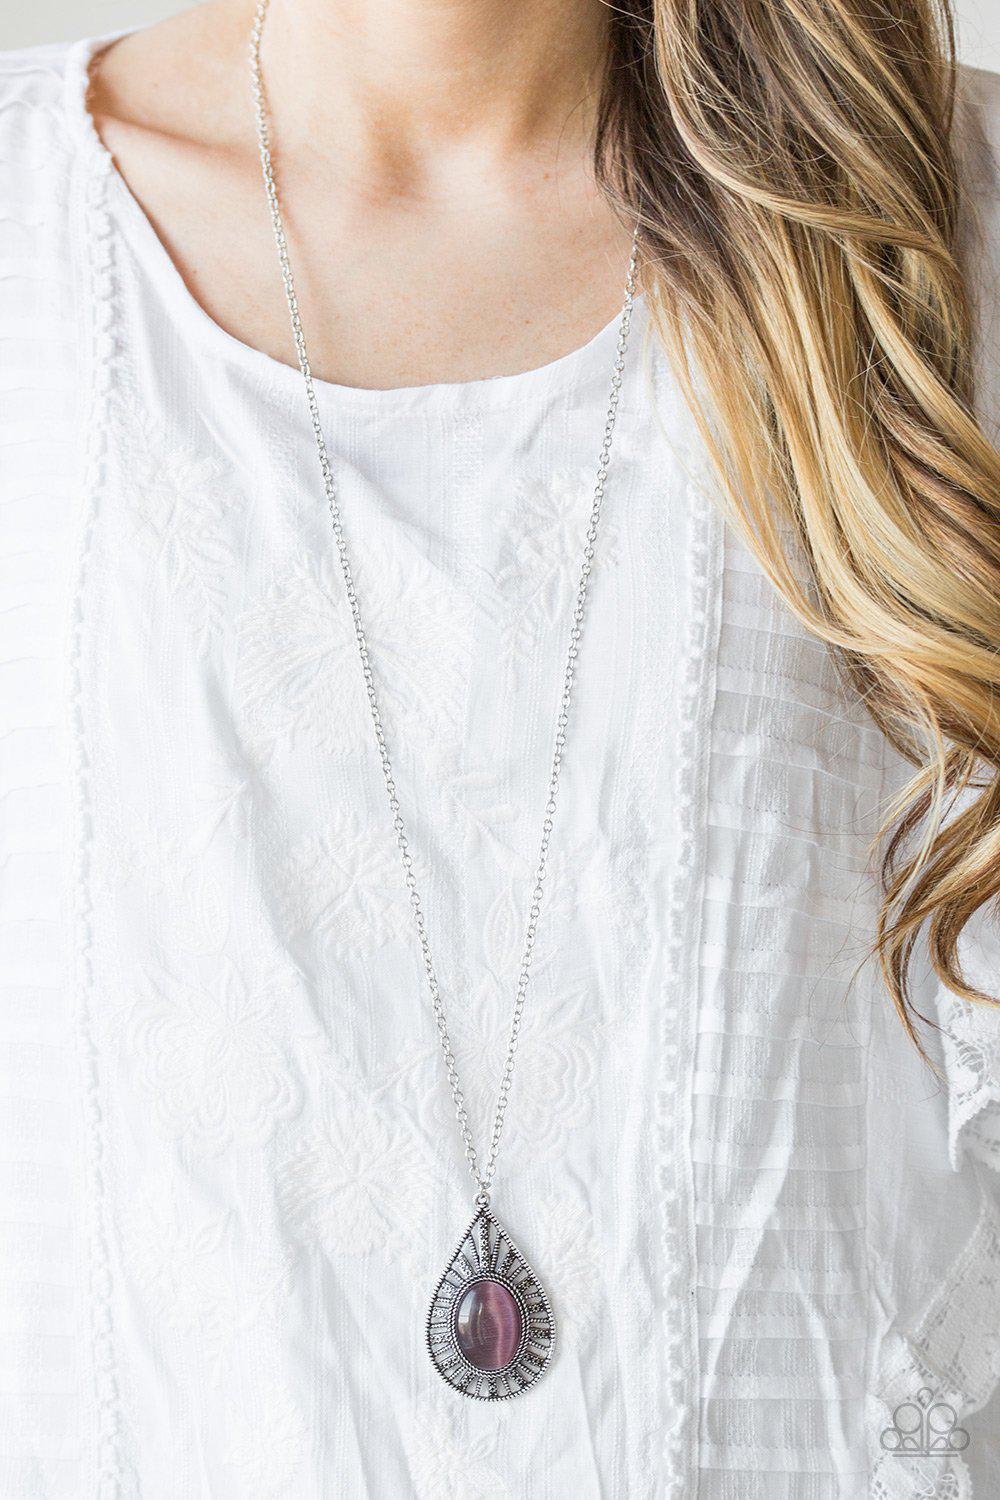 Total Tranquility Purple Moonstone Necklace - Paparazzi Accessories-CarasShop.com - $5 Jewelry by Cara Jewels